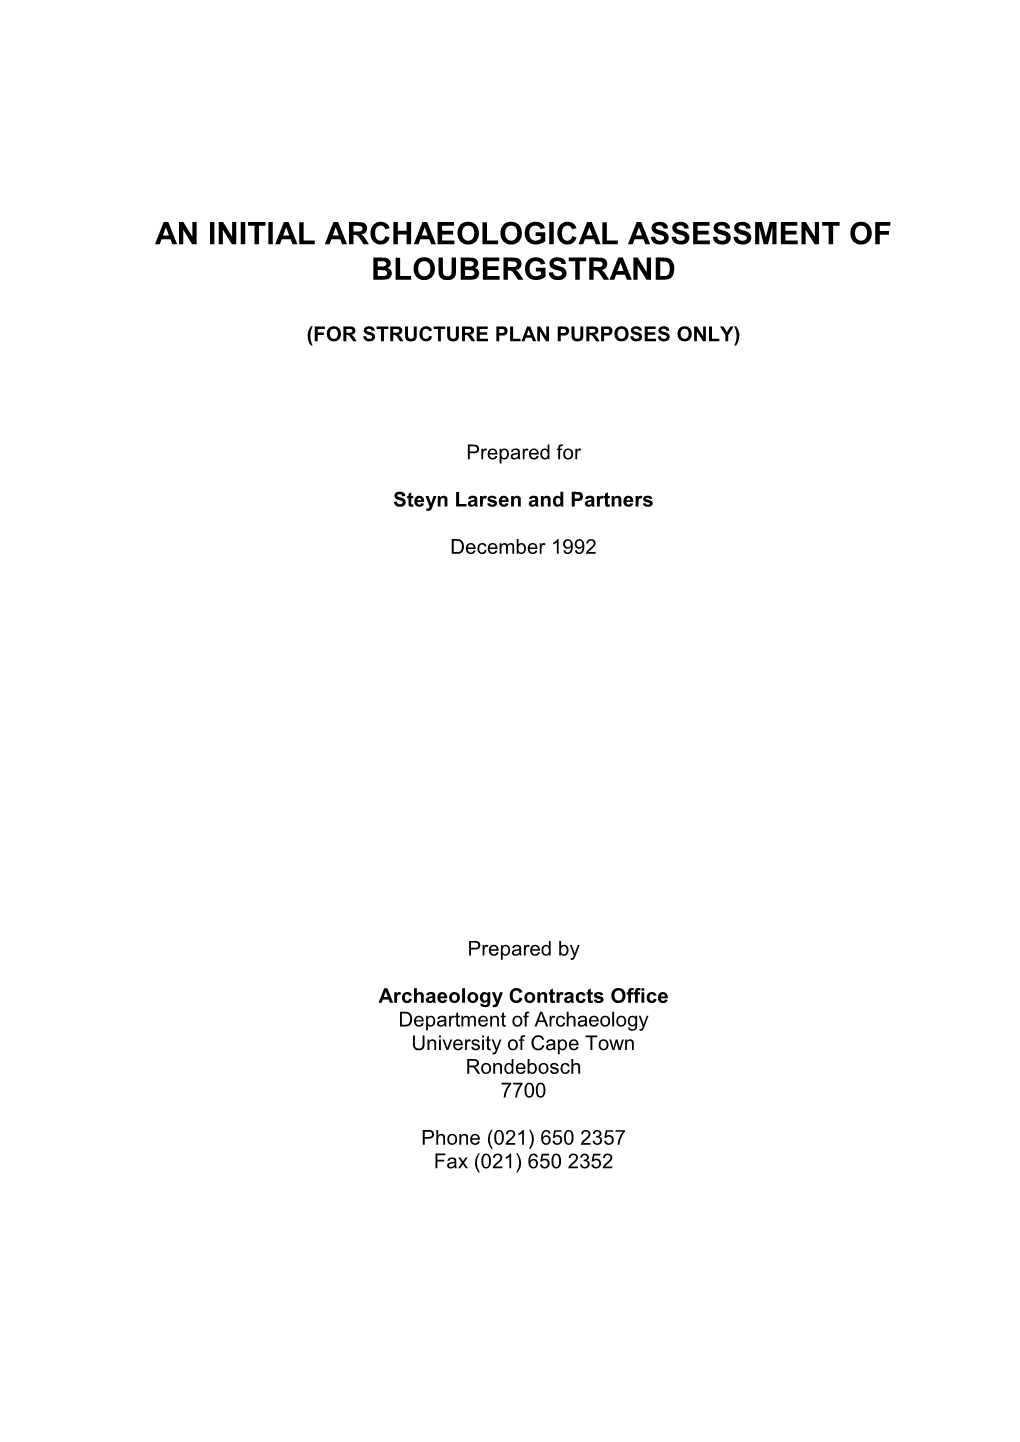 An Initial Archaeological Assessment of Bloubergstrand